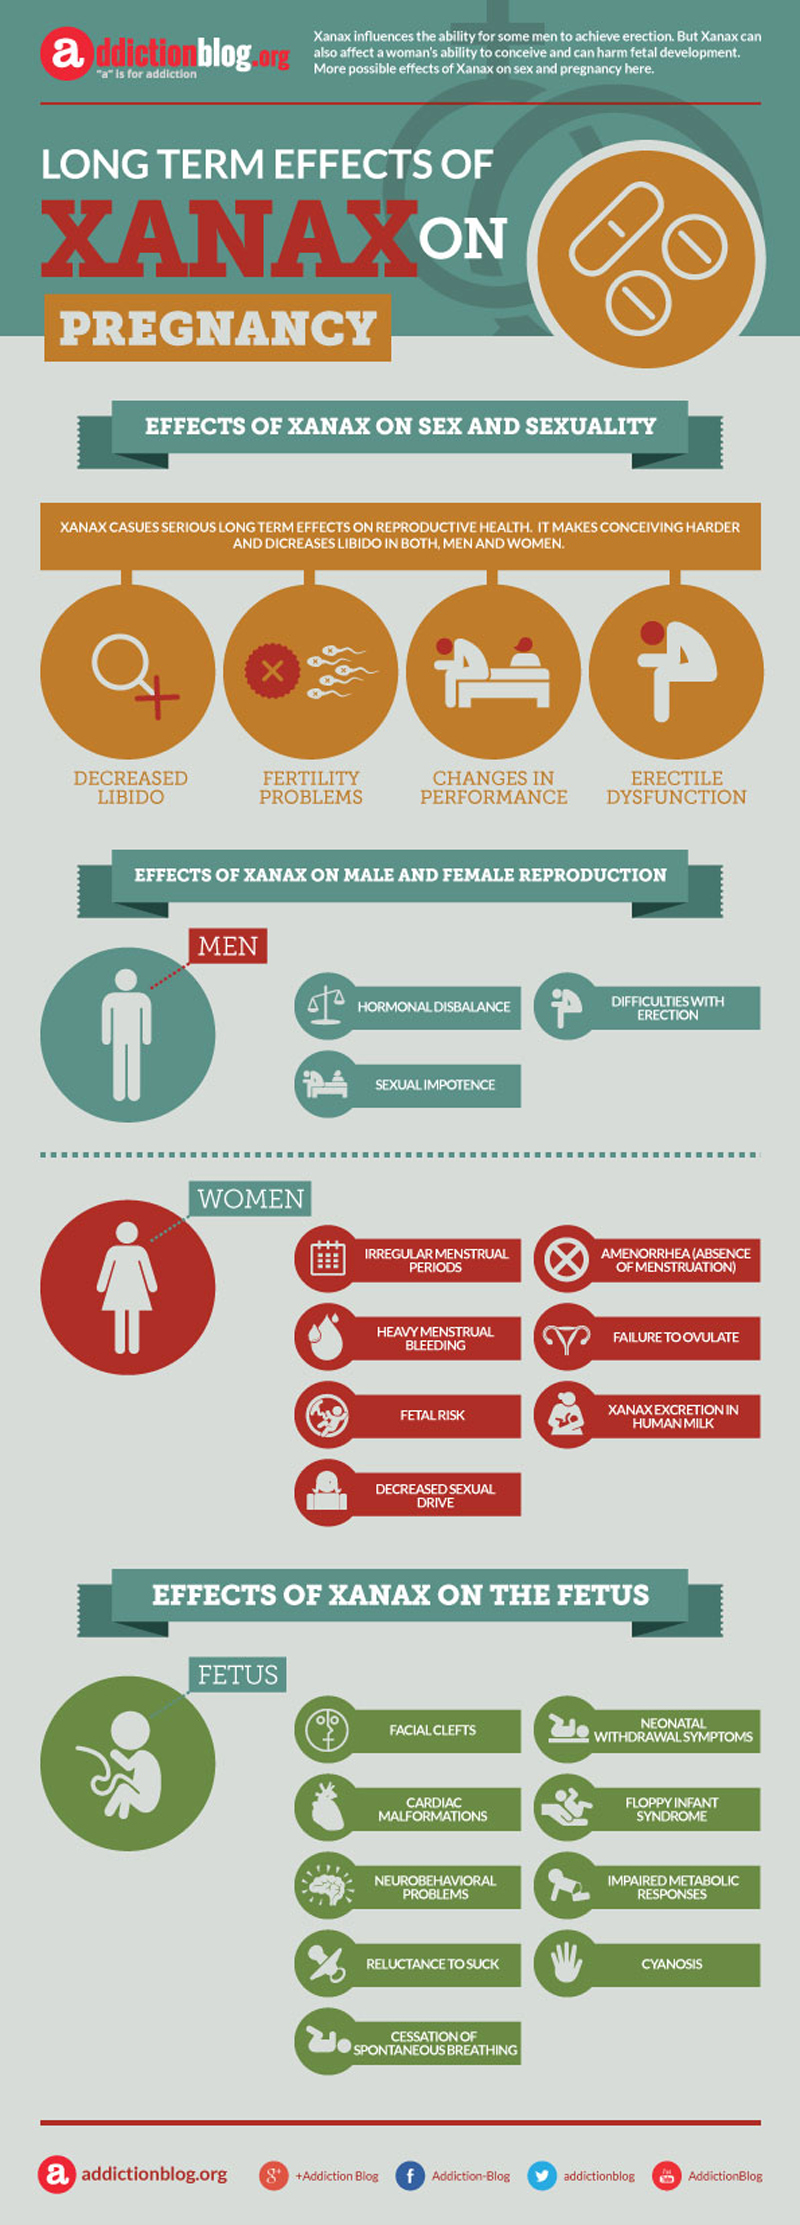 Effects of Xanax on pregnancy (INFOGRAPHIC)